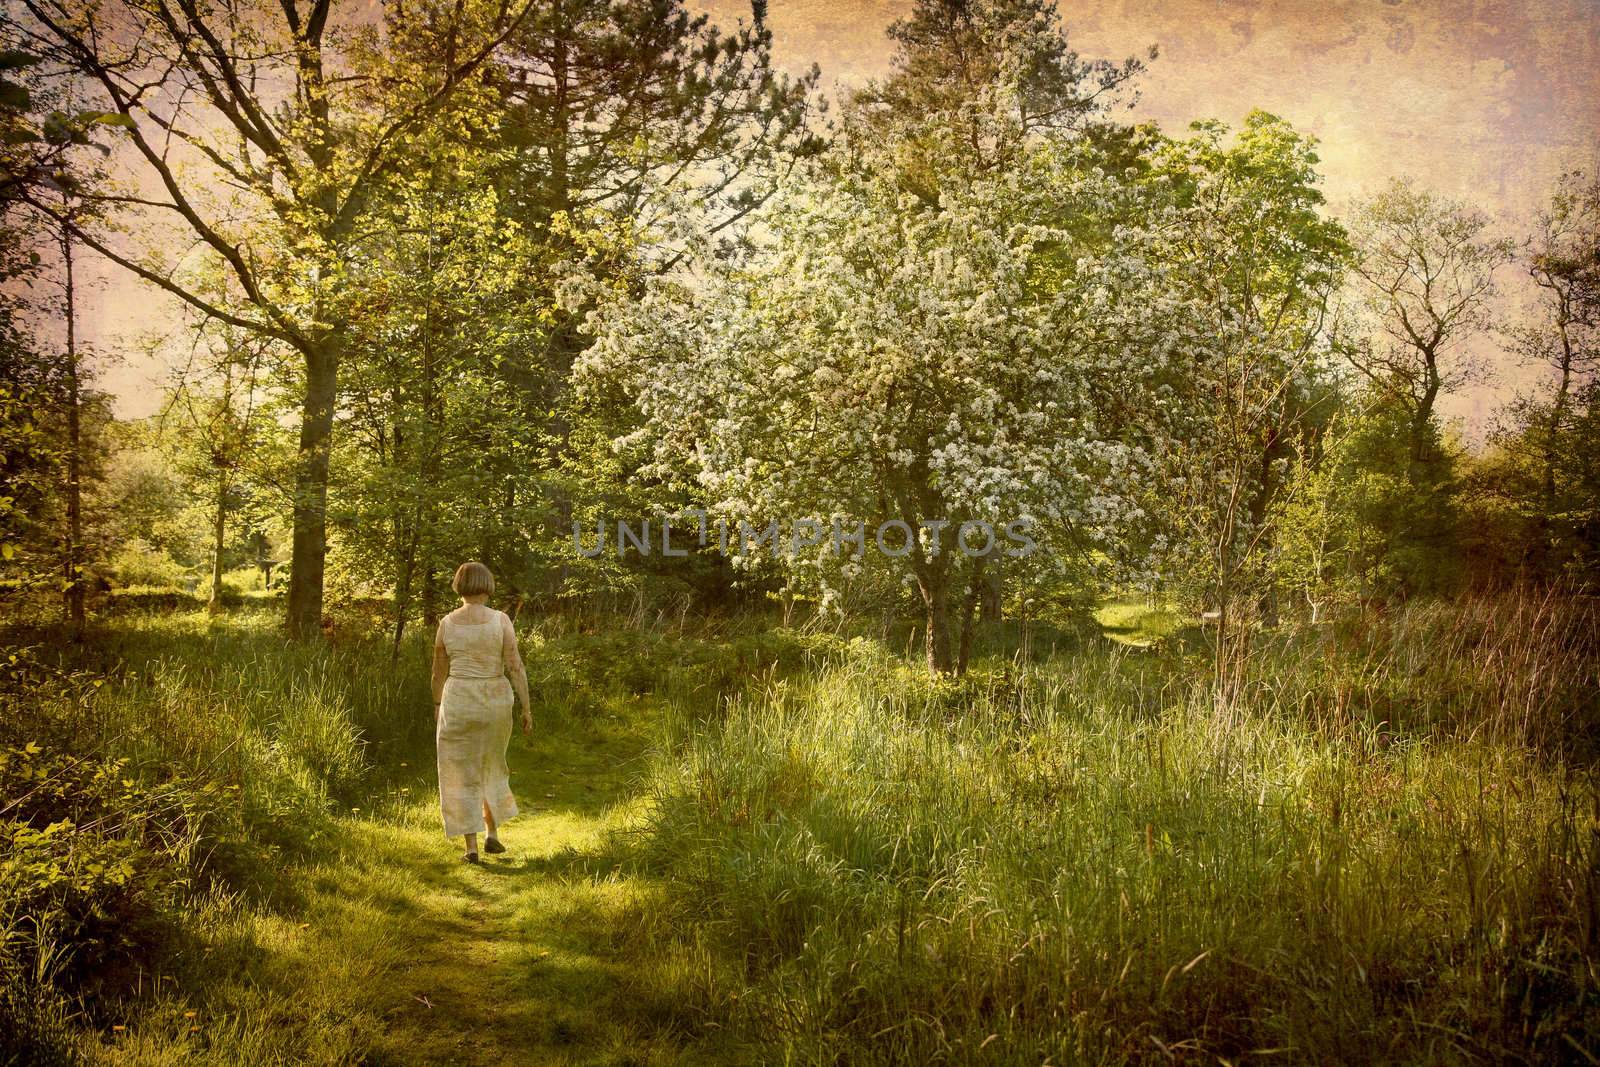 Artistic work of my own in retro style - Postcard from Denmark. - Lonely woman walking in a meadow. More of my images worked together to reflect age and time.